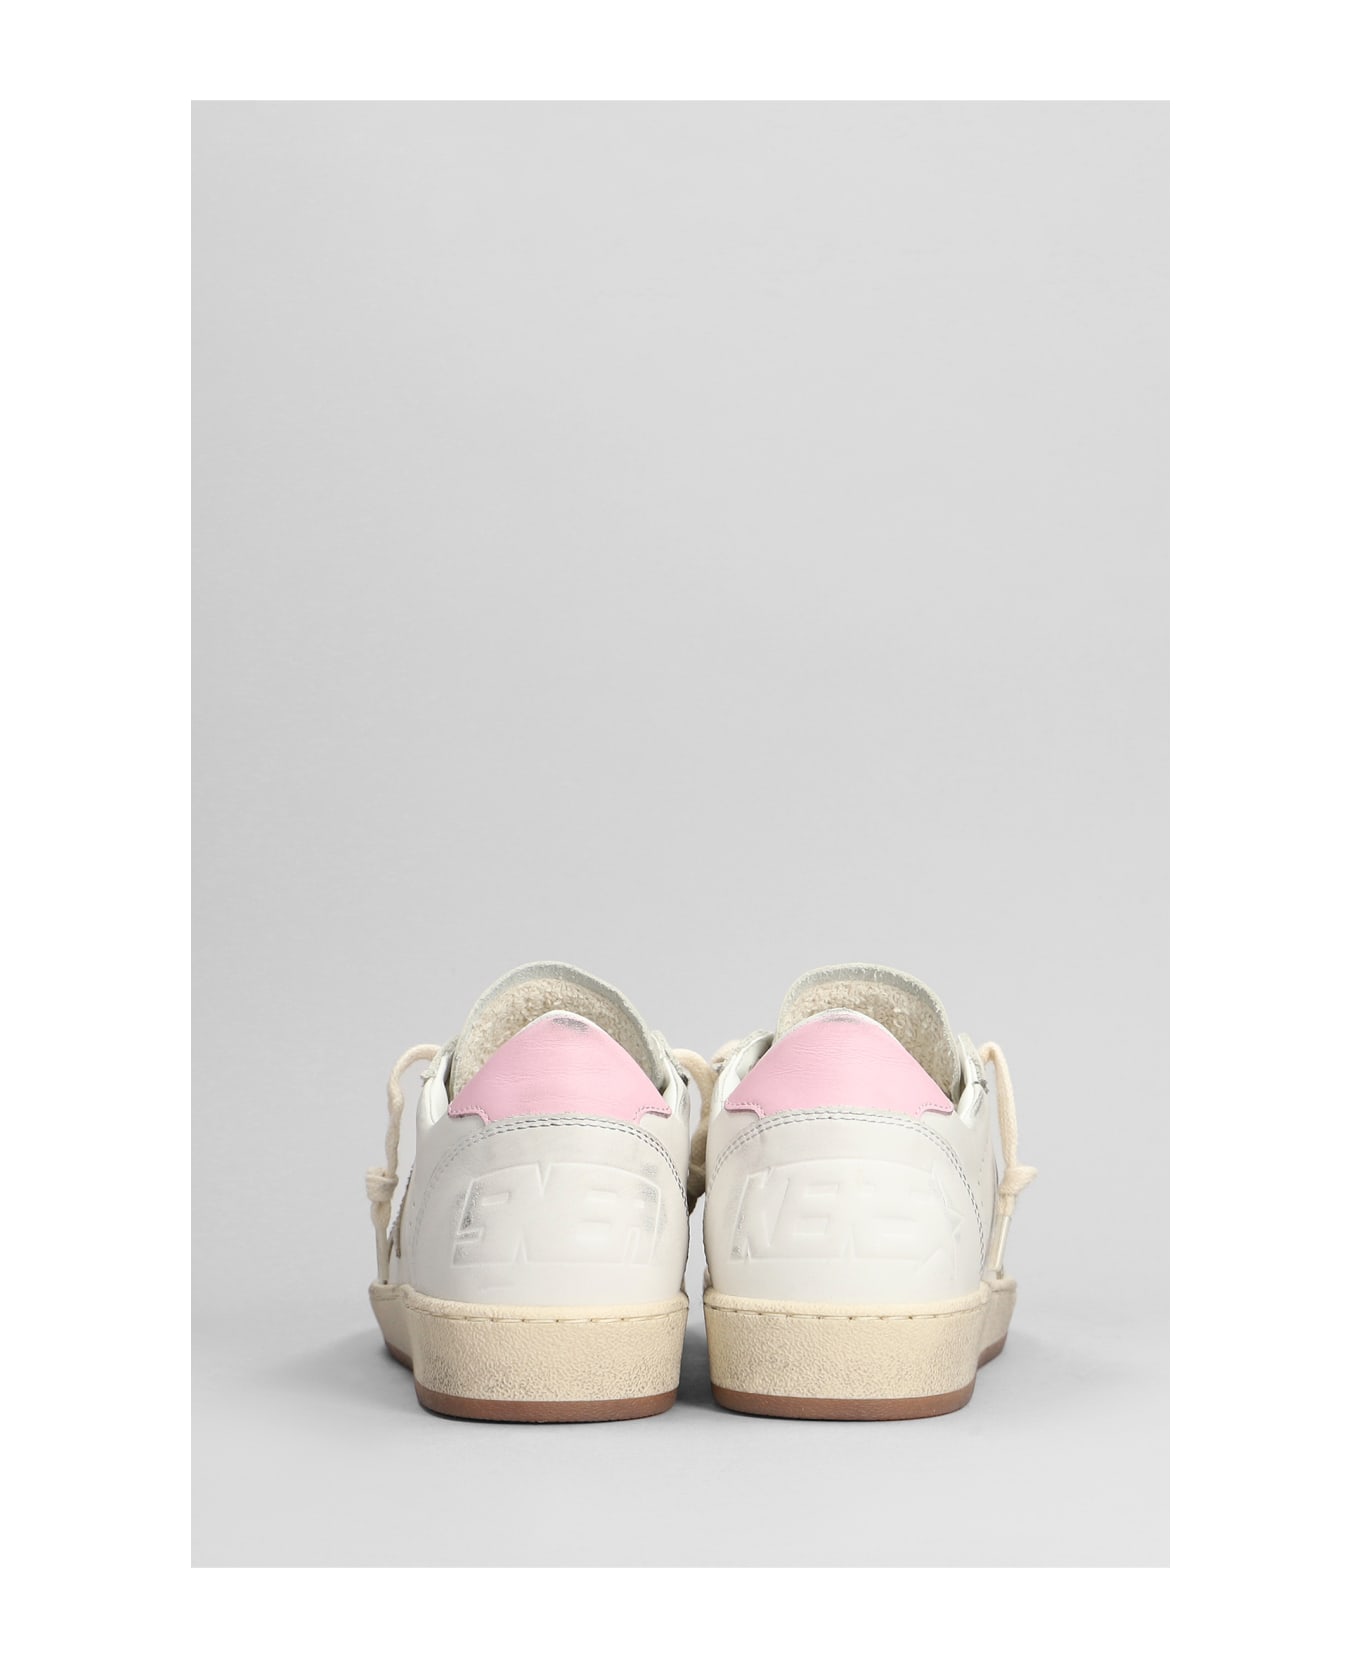 Golden Goose Ball Star Sneakers In White Leather - white